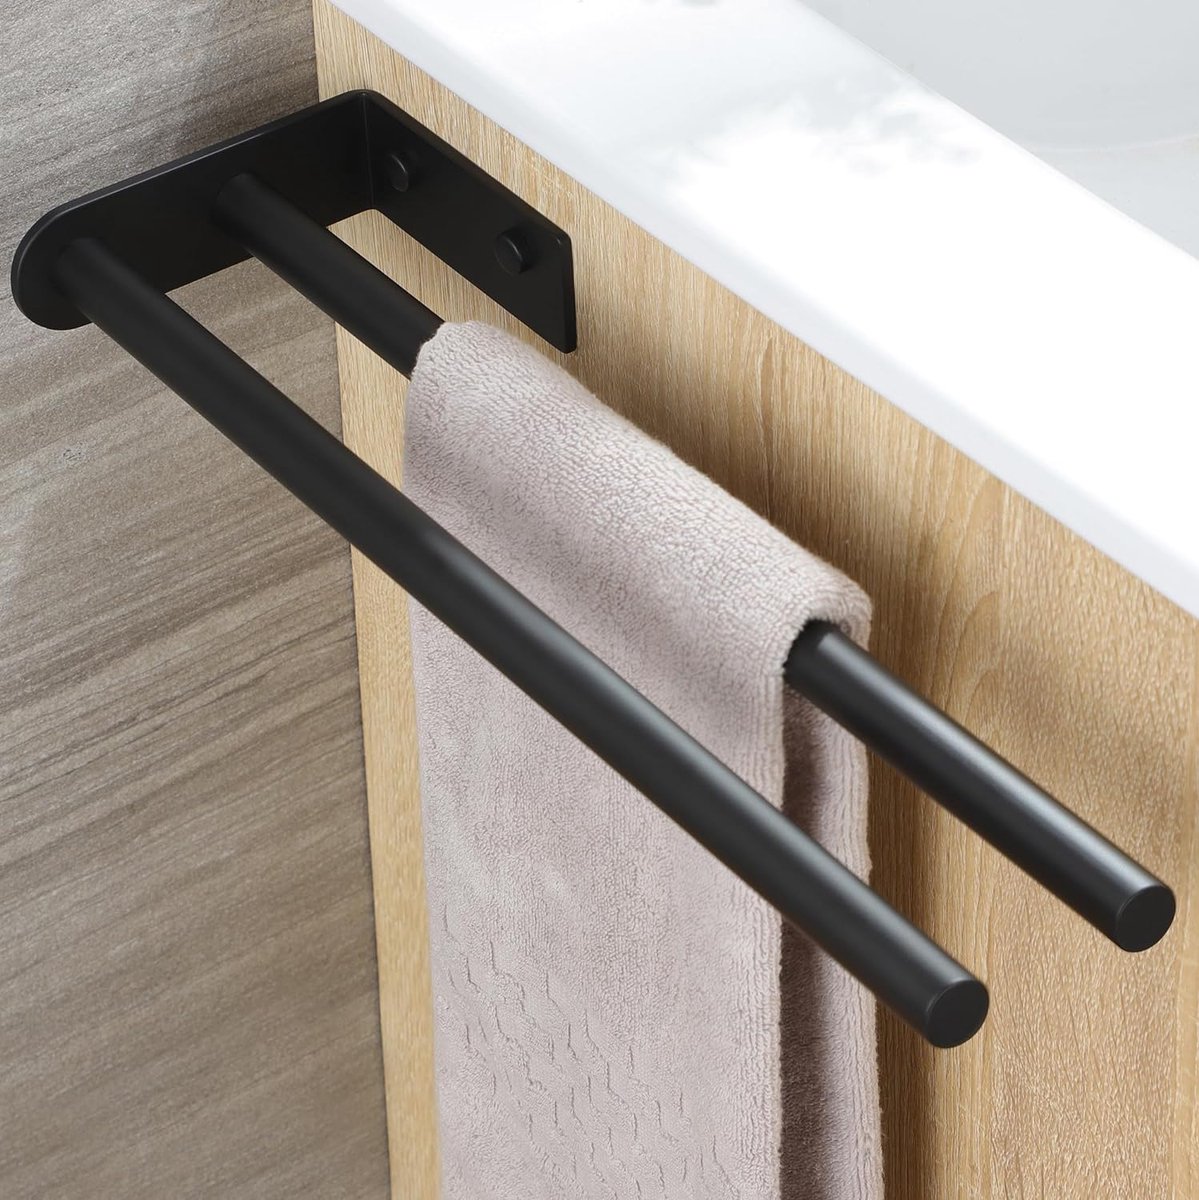 Towel Rail Double Arm Stainless Steel Towel Rail Double Bath Towel Holder for Bathroom Kitchen Wall Towel Rack 40 cm Wall Mounted (Black)